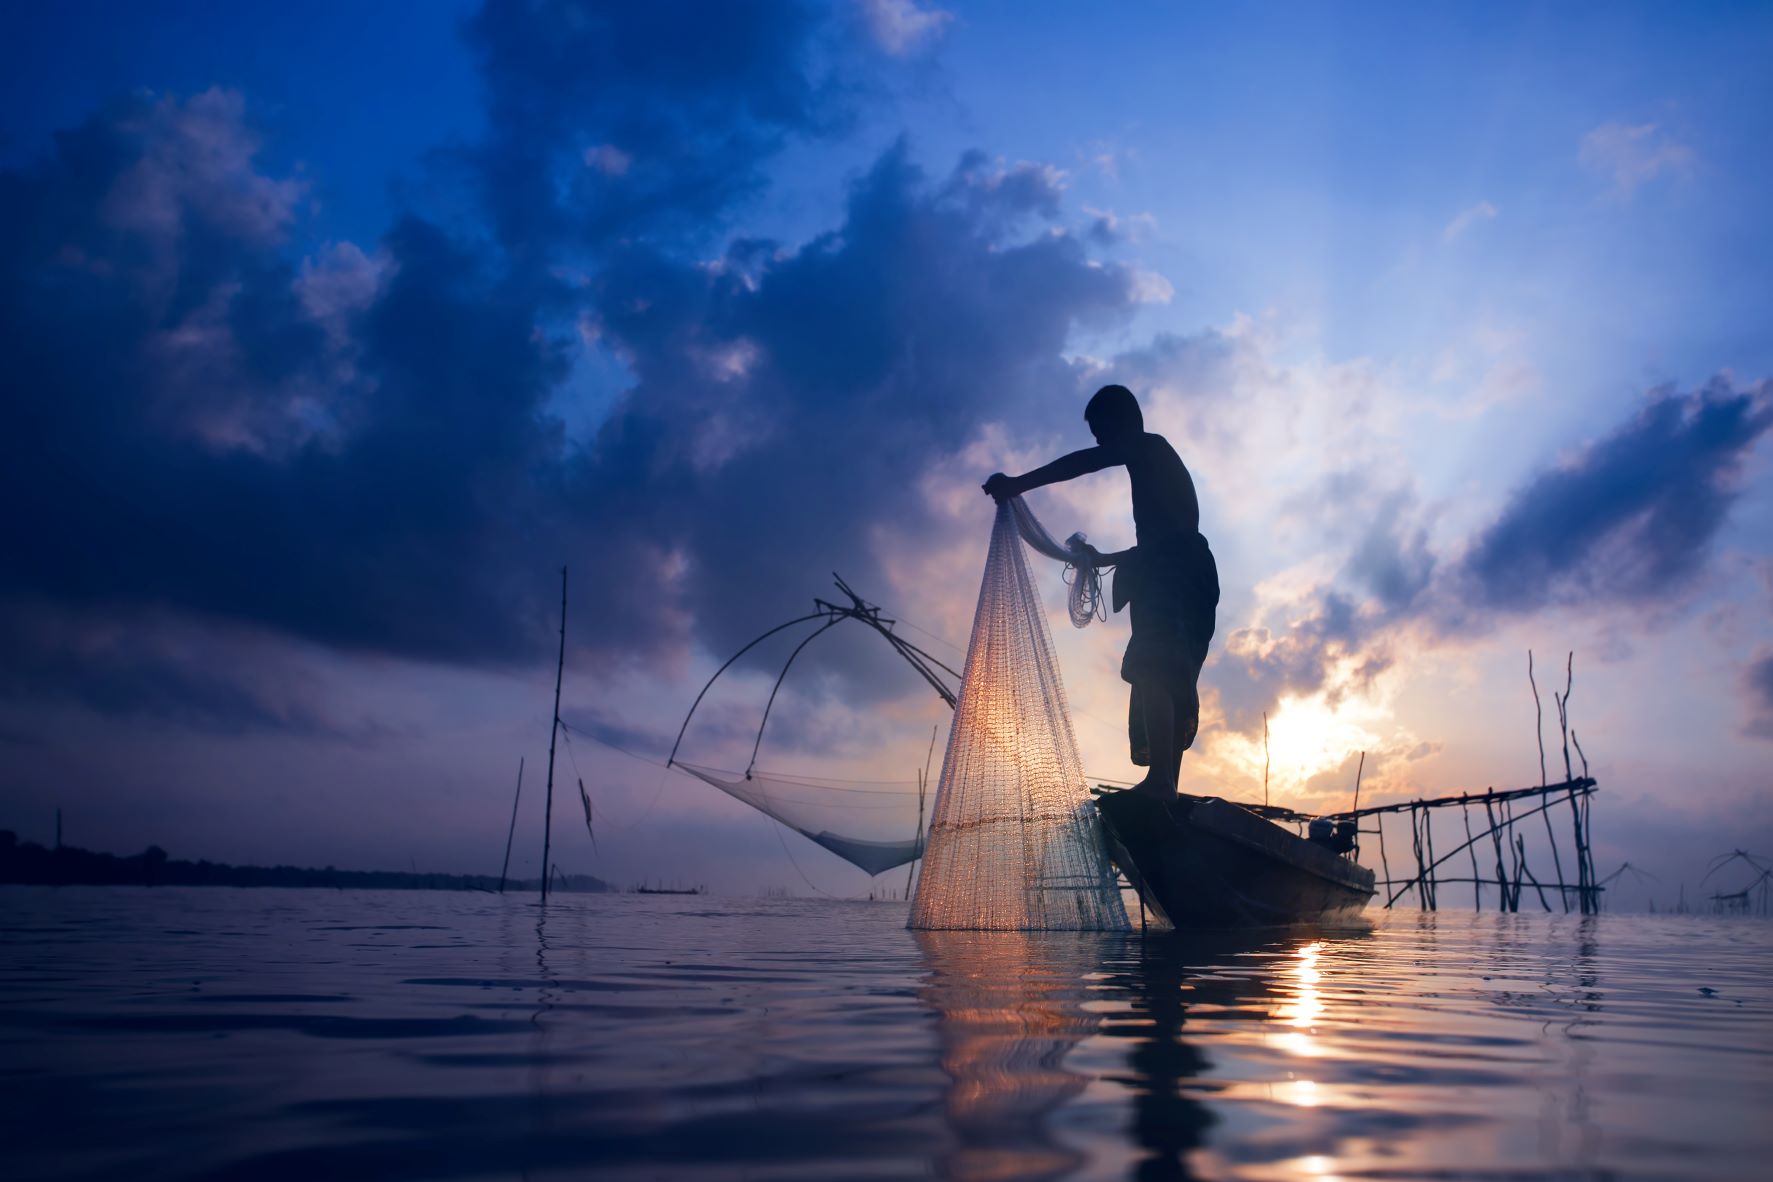 Silhouette of a fisherman on a boat